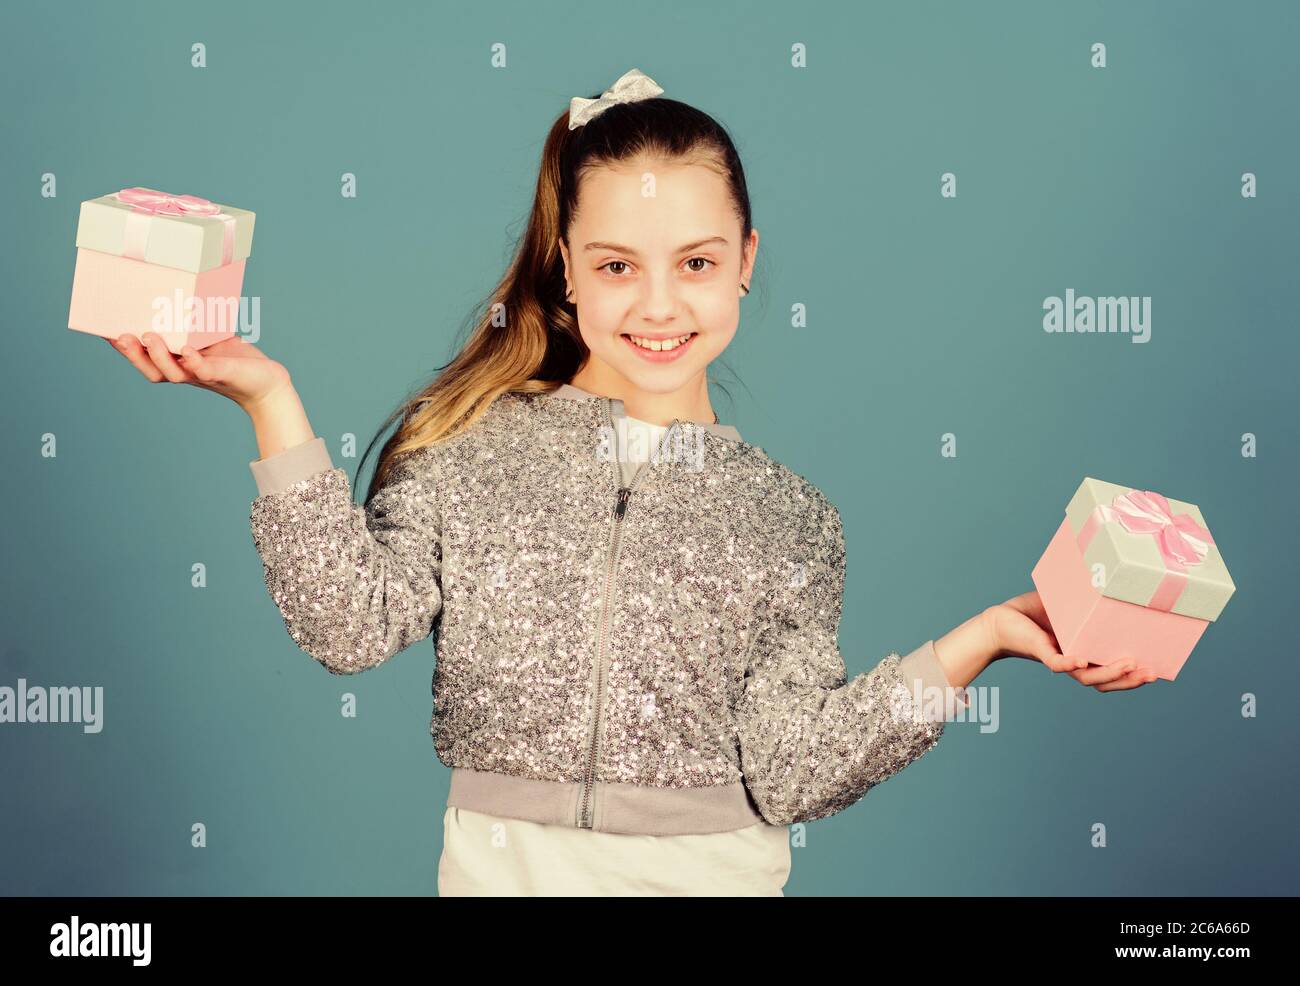 Shopping day. Cute child carry gift boxes. Surprise gift box. Birthday wish list. World of happiness. Pick bonus. Special happens every day. Girl with gift boxes blue background. Black friday. Stock Photo